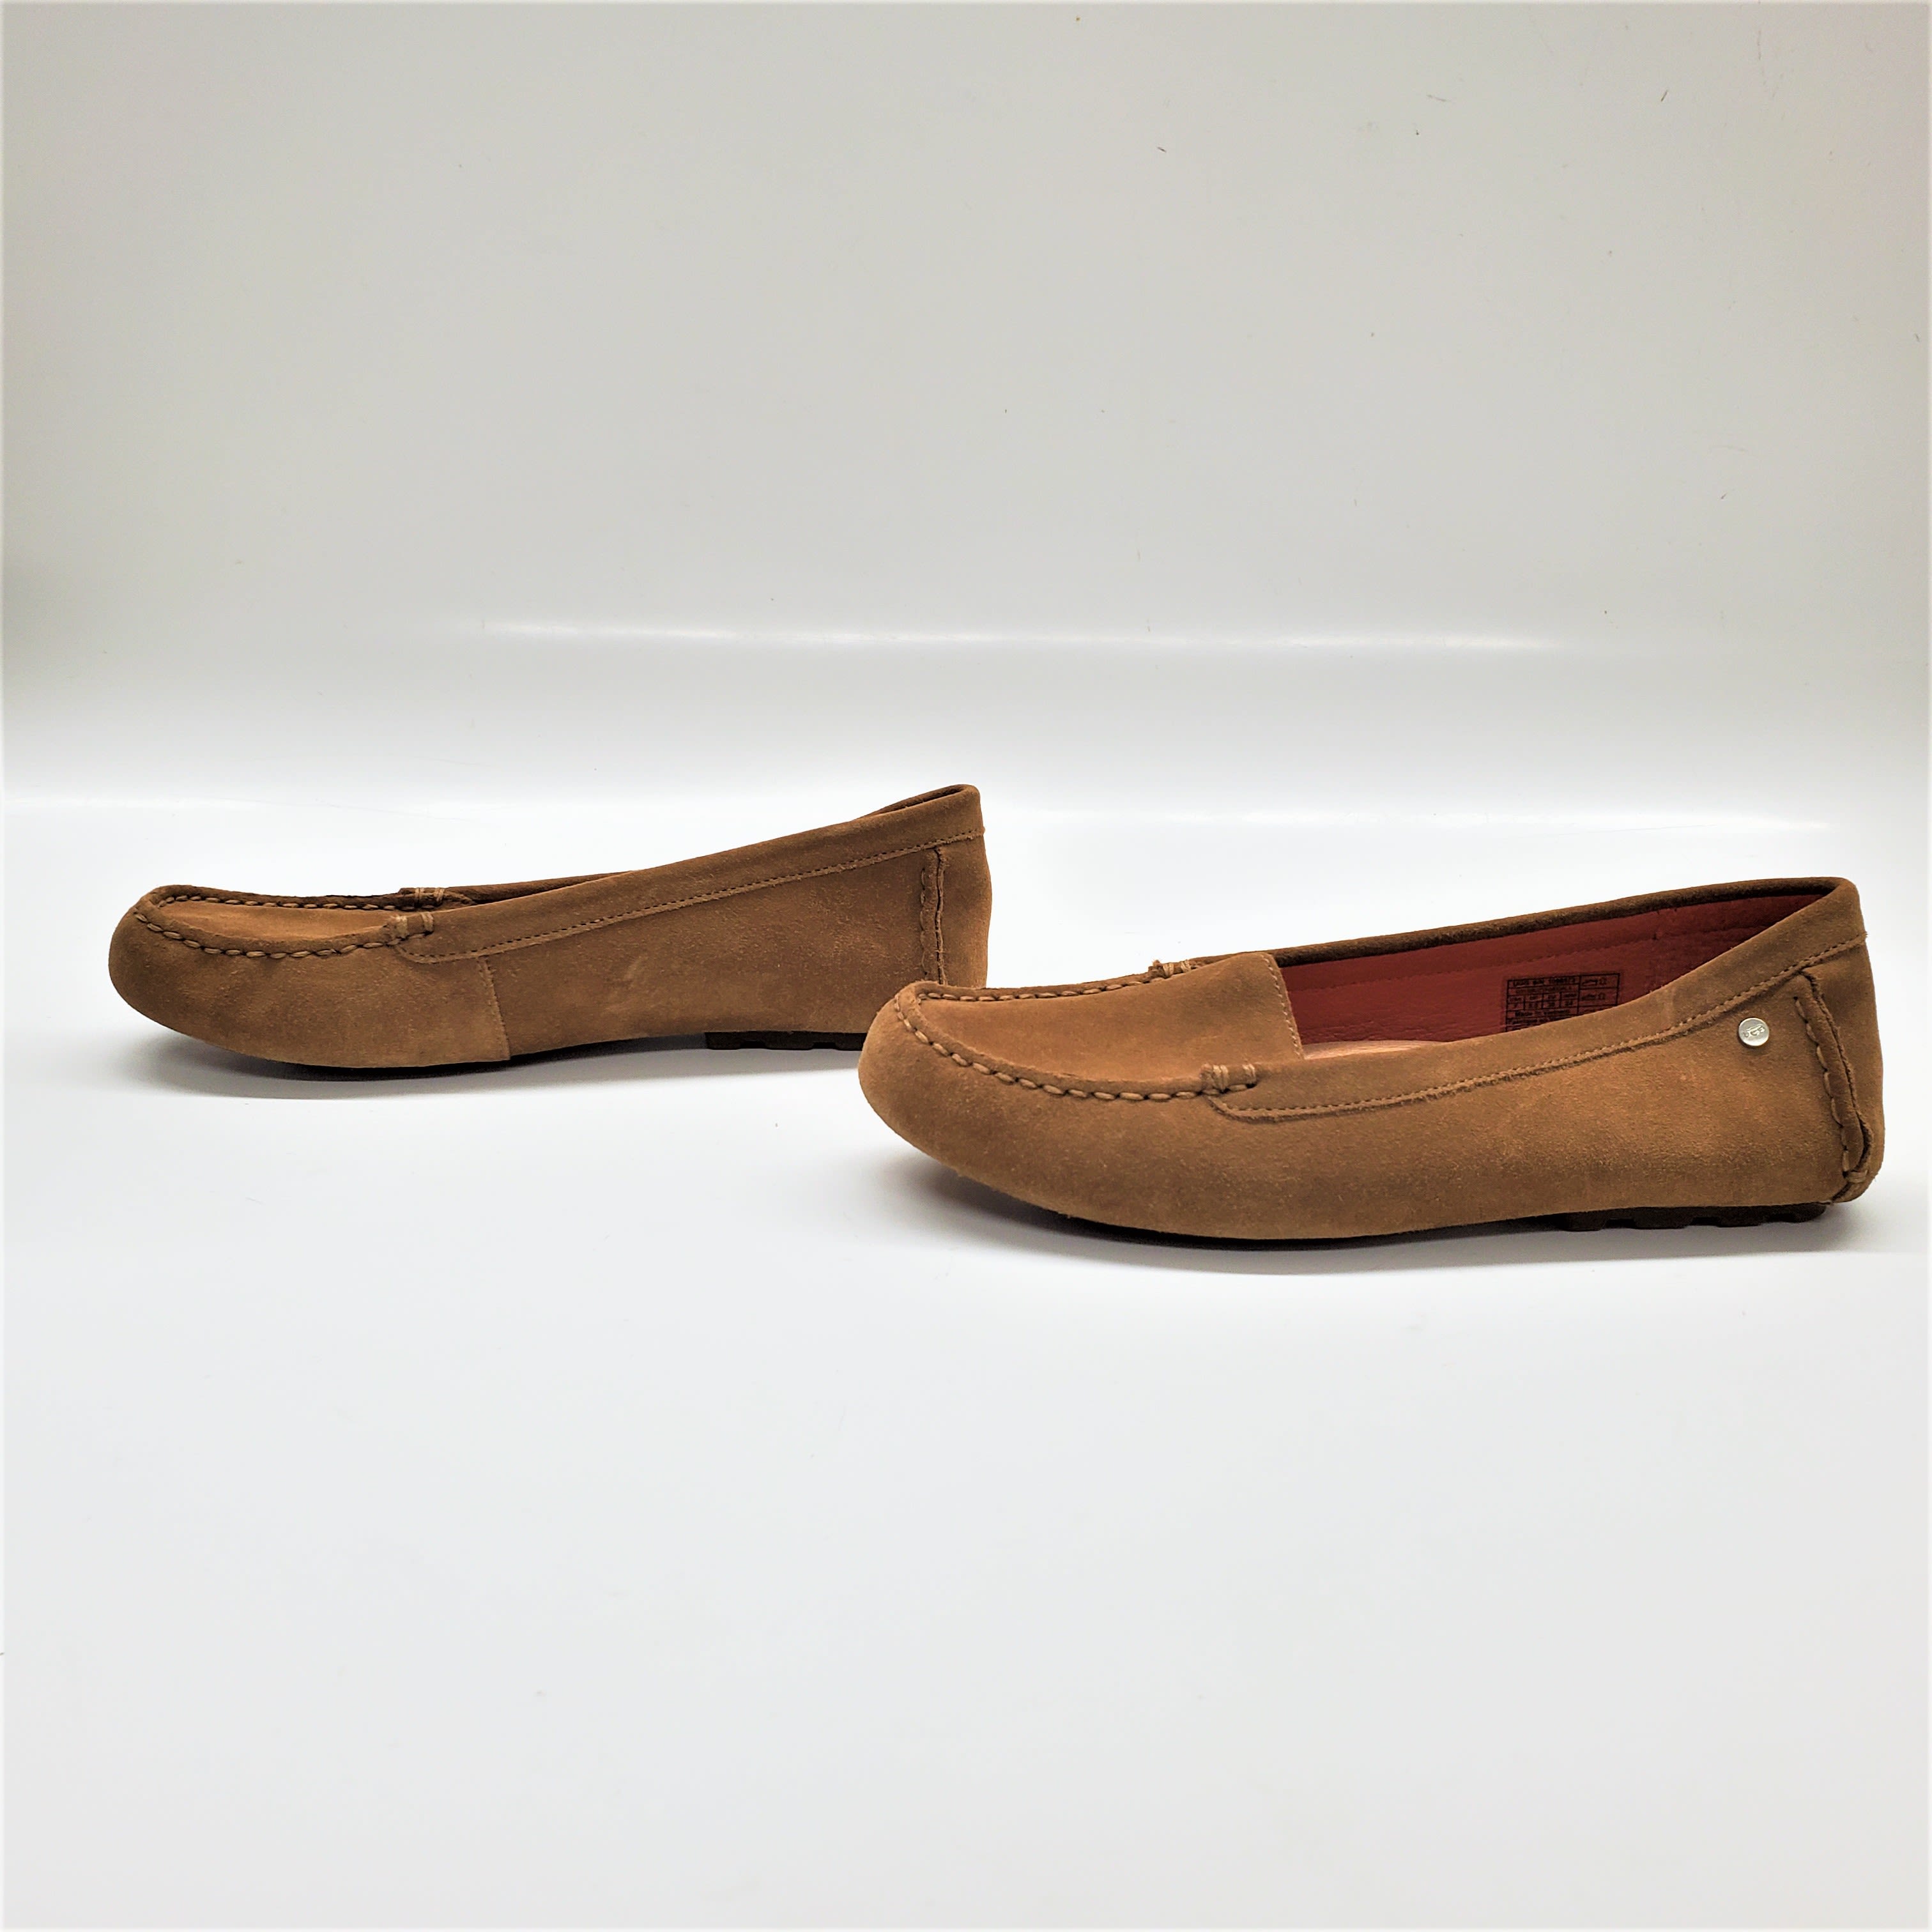 Buy the Ugg Milana Loafers Shoes in Brown/Chestnut Suede Leather